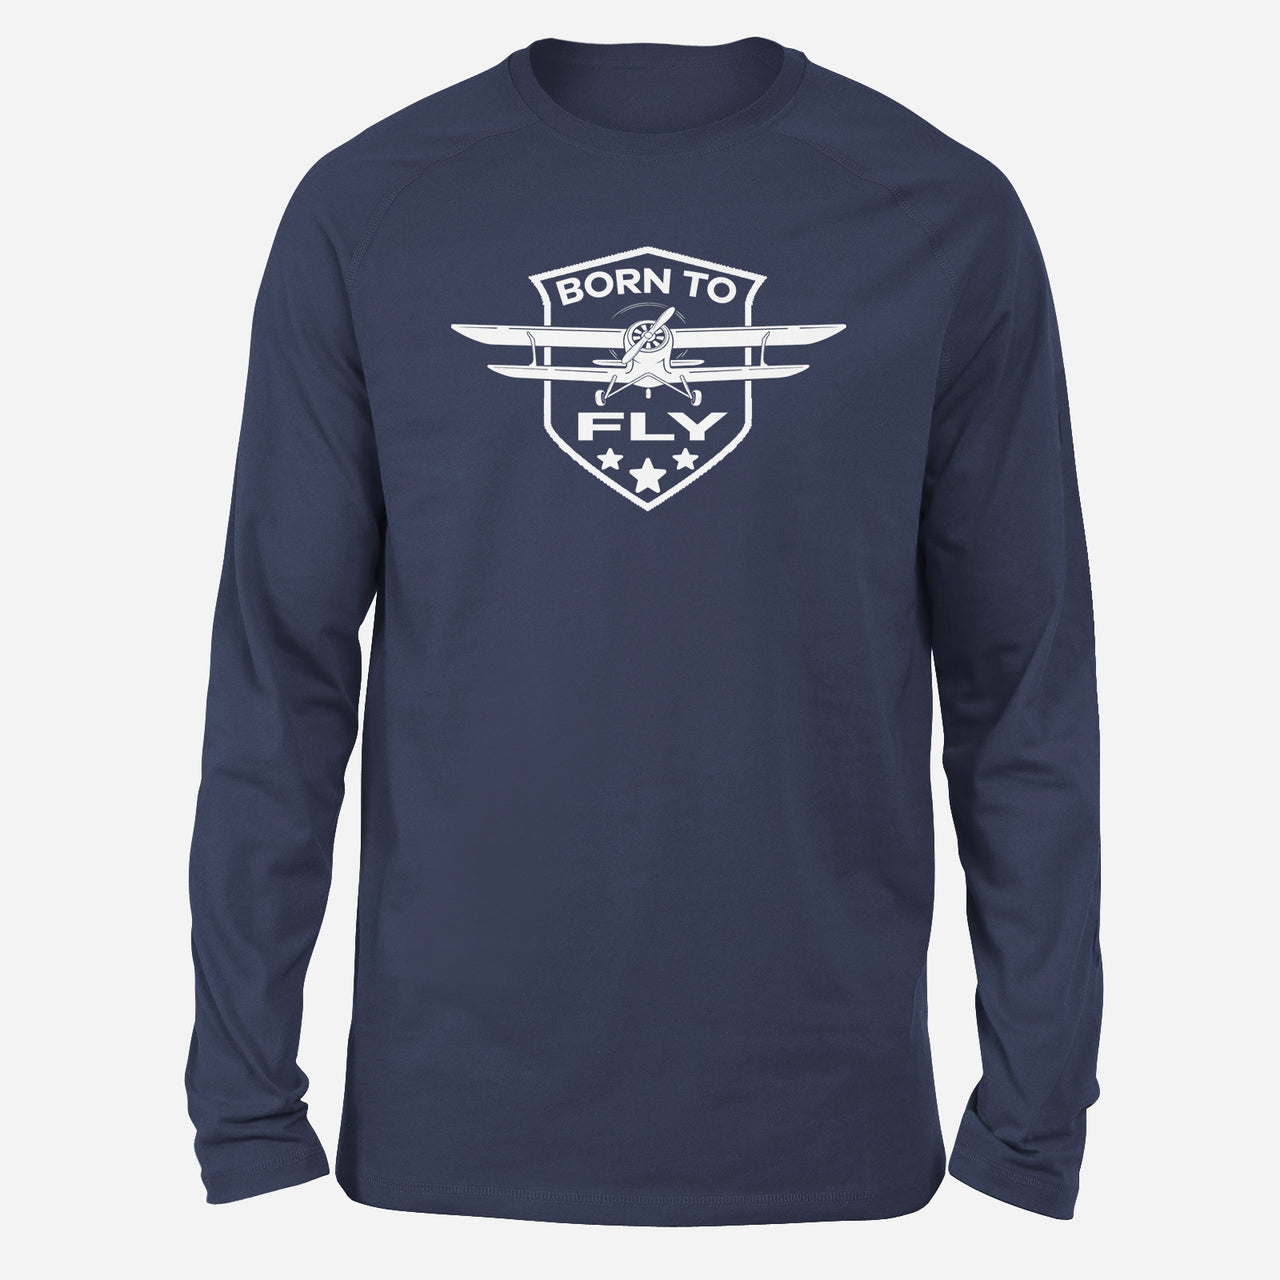 Super Born To Fly Designed Long-Sleeve T-Shirts